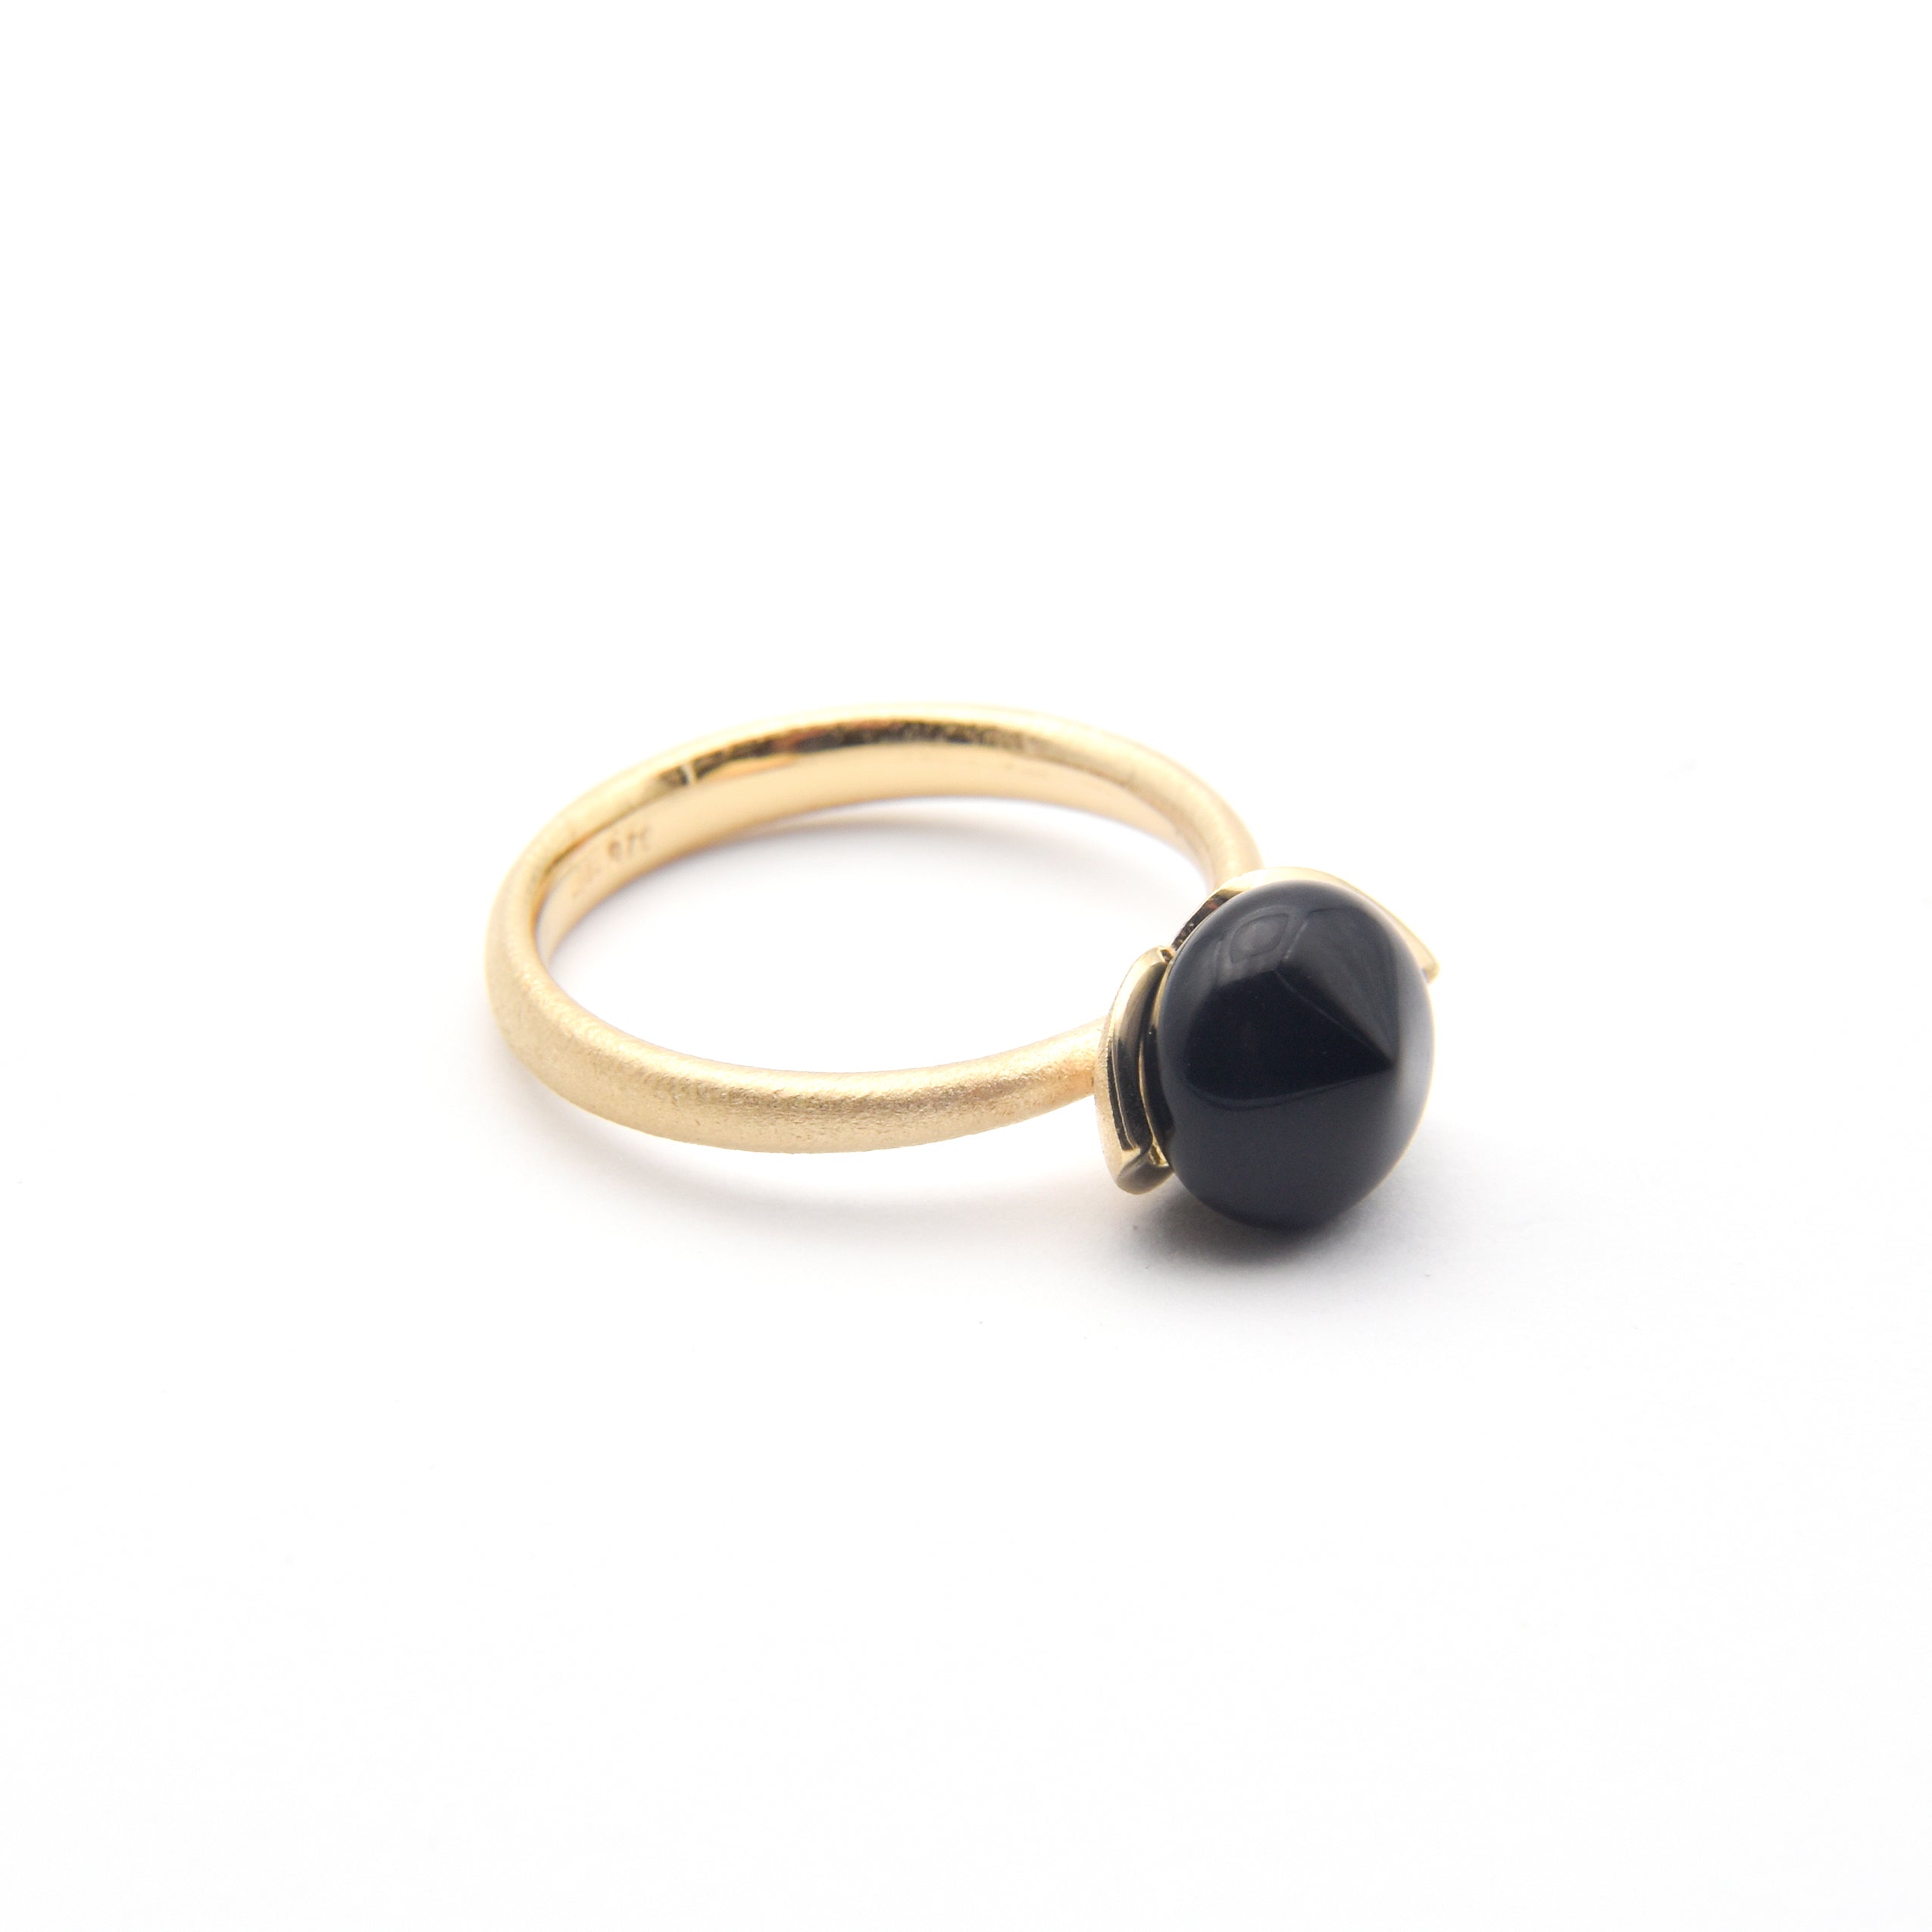 Dolce ring "smal" med onix 925/-